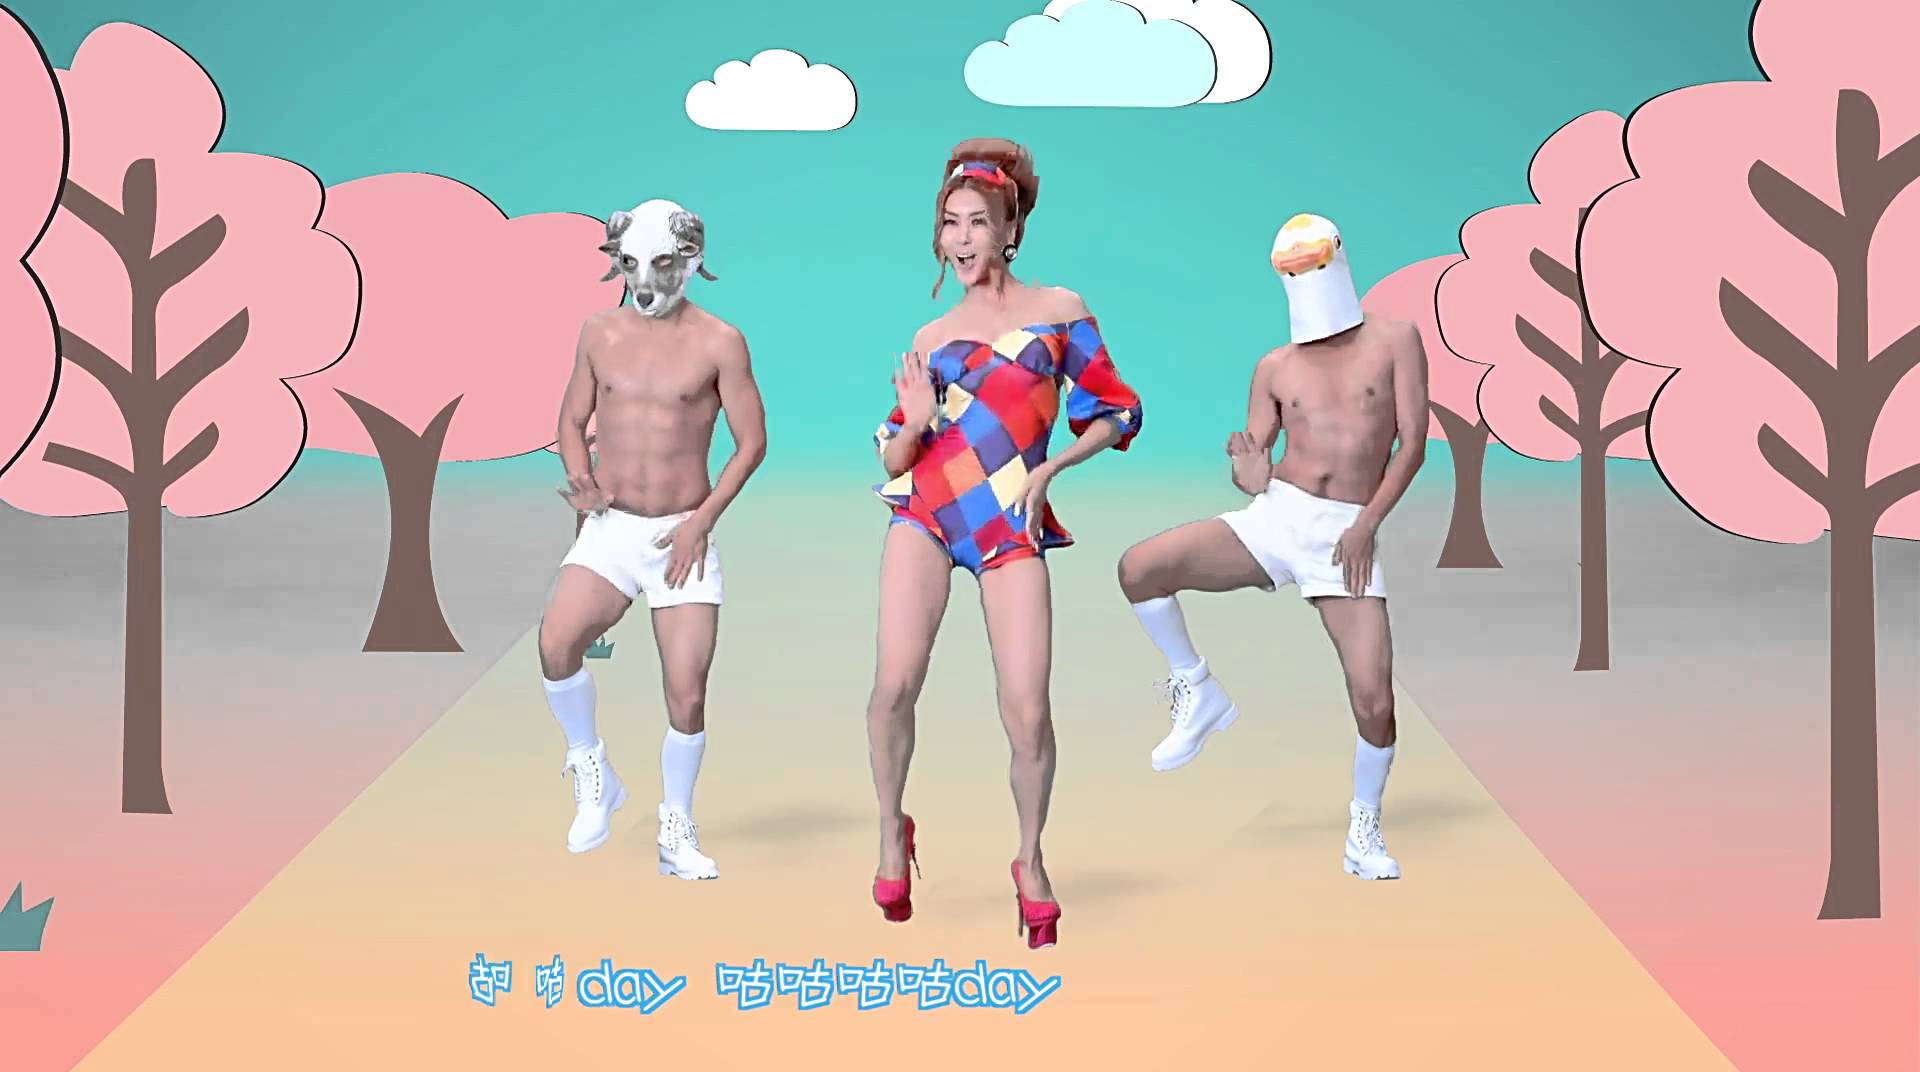 WATCH: WTF Chinese music video is taking the world by storm (but not so much China)